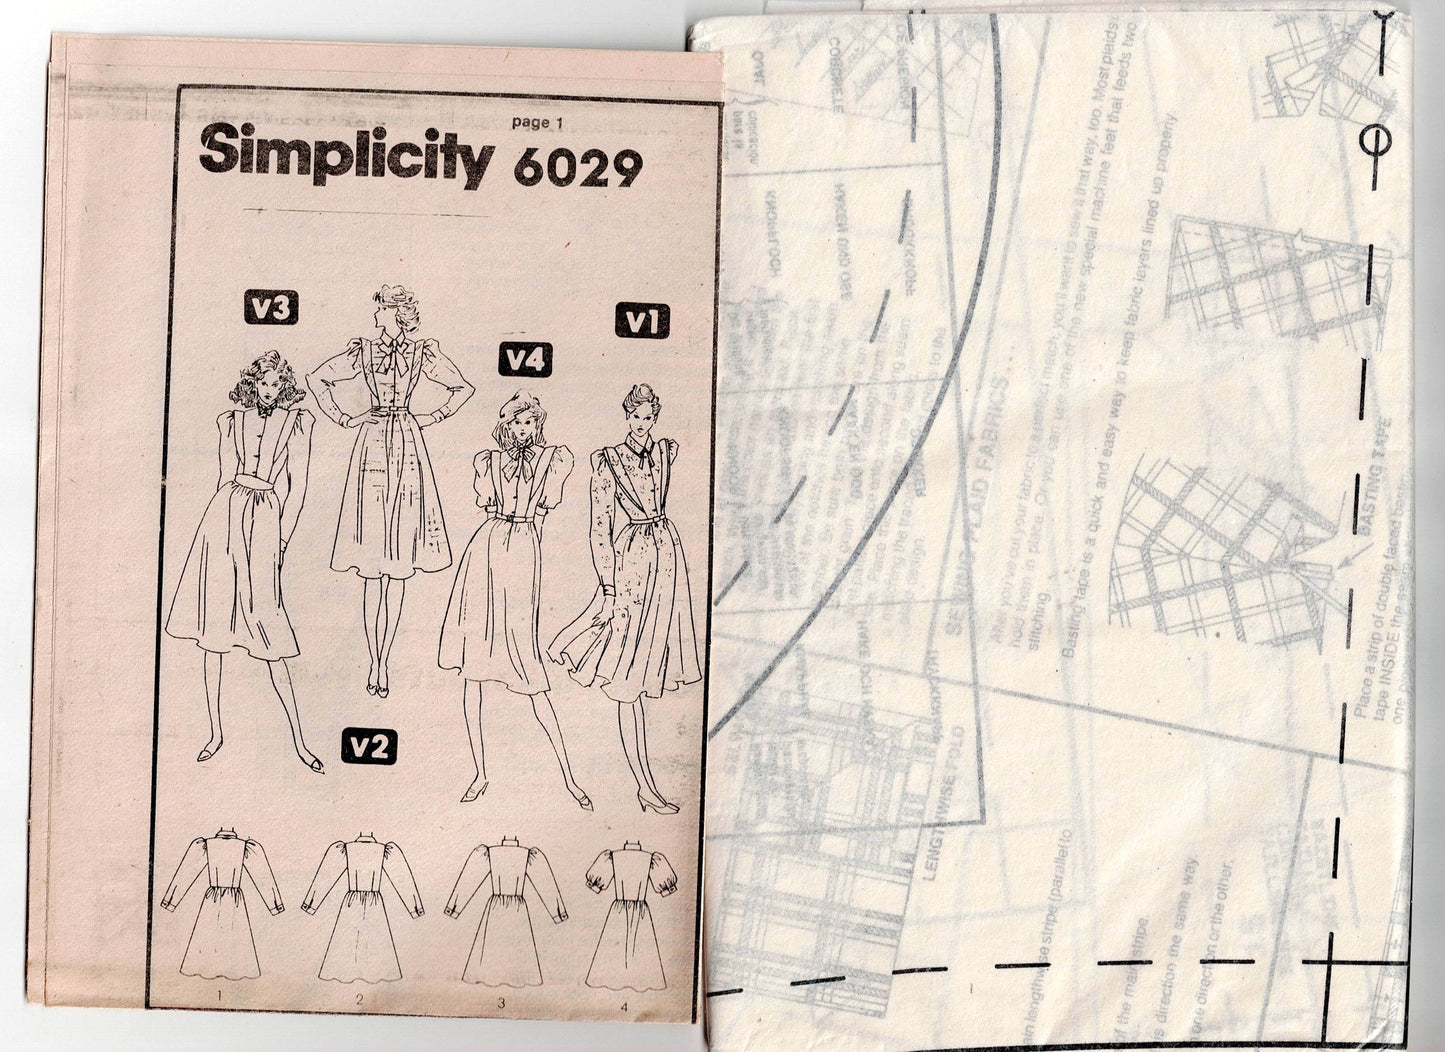 Simplicity 6029 Womens Full Skirt Flanged Shoulder Puffy Sleeved Dress with Pockets 1980s Vintage Sewing Pattern Size 12 Bust 34 inches UNCUT Factory Folded